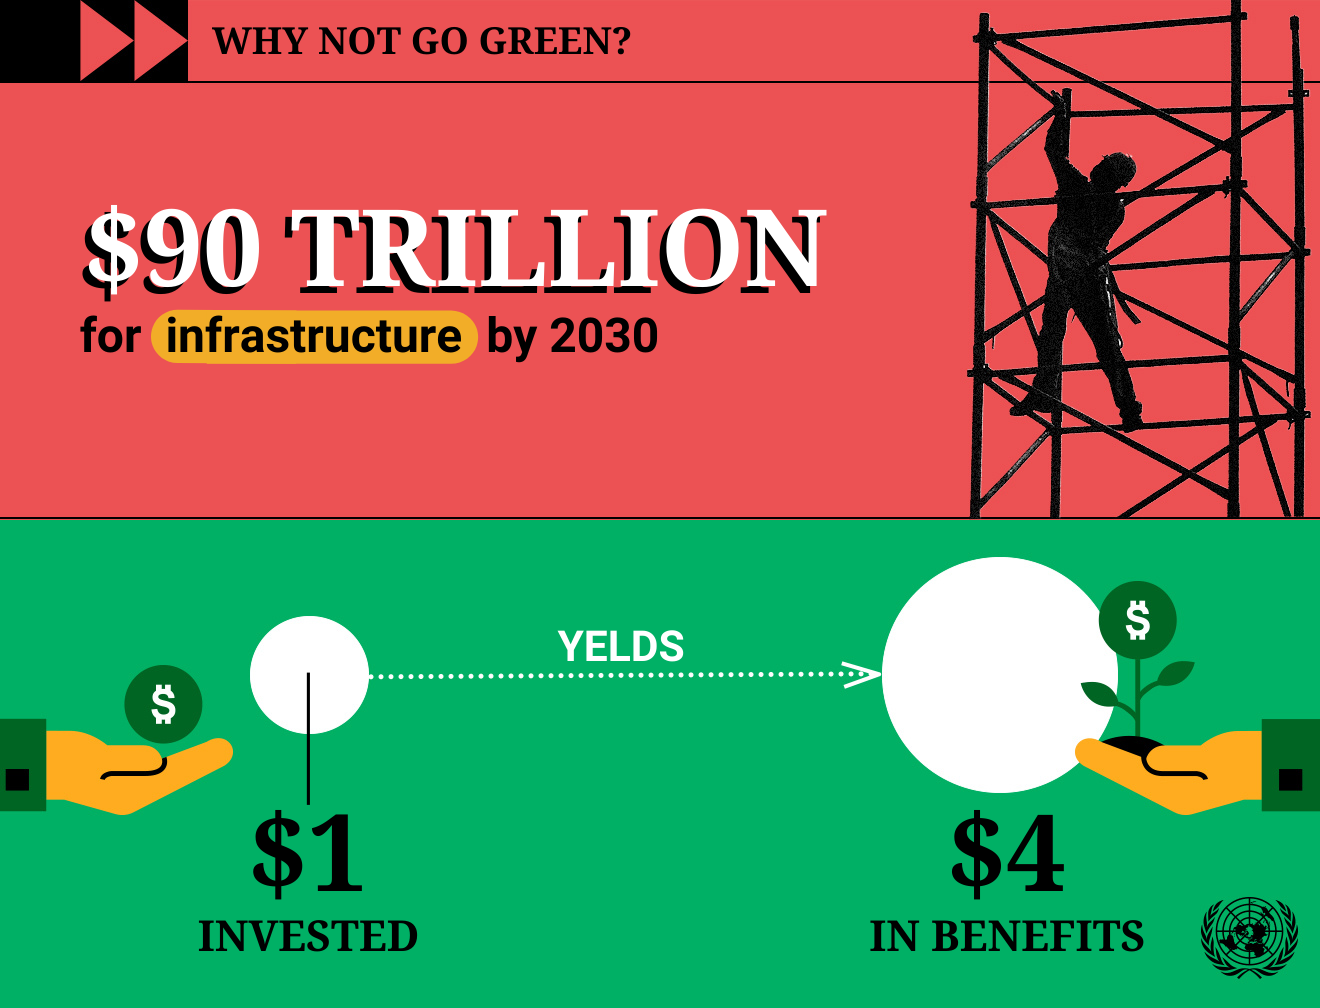 Illustration reads: $90 Trillion for infrastructure by 2030